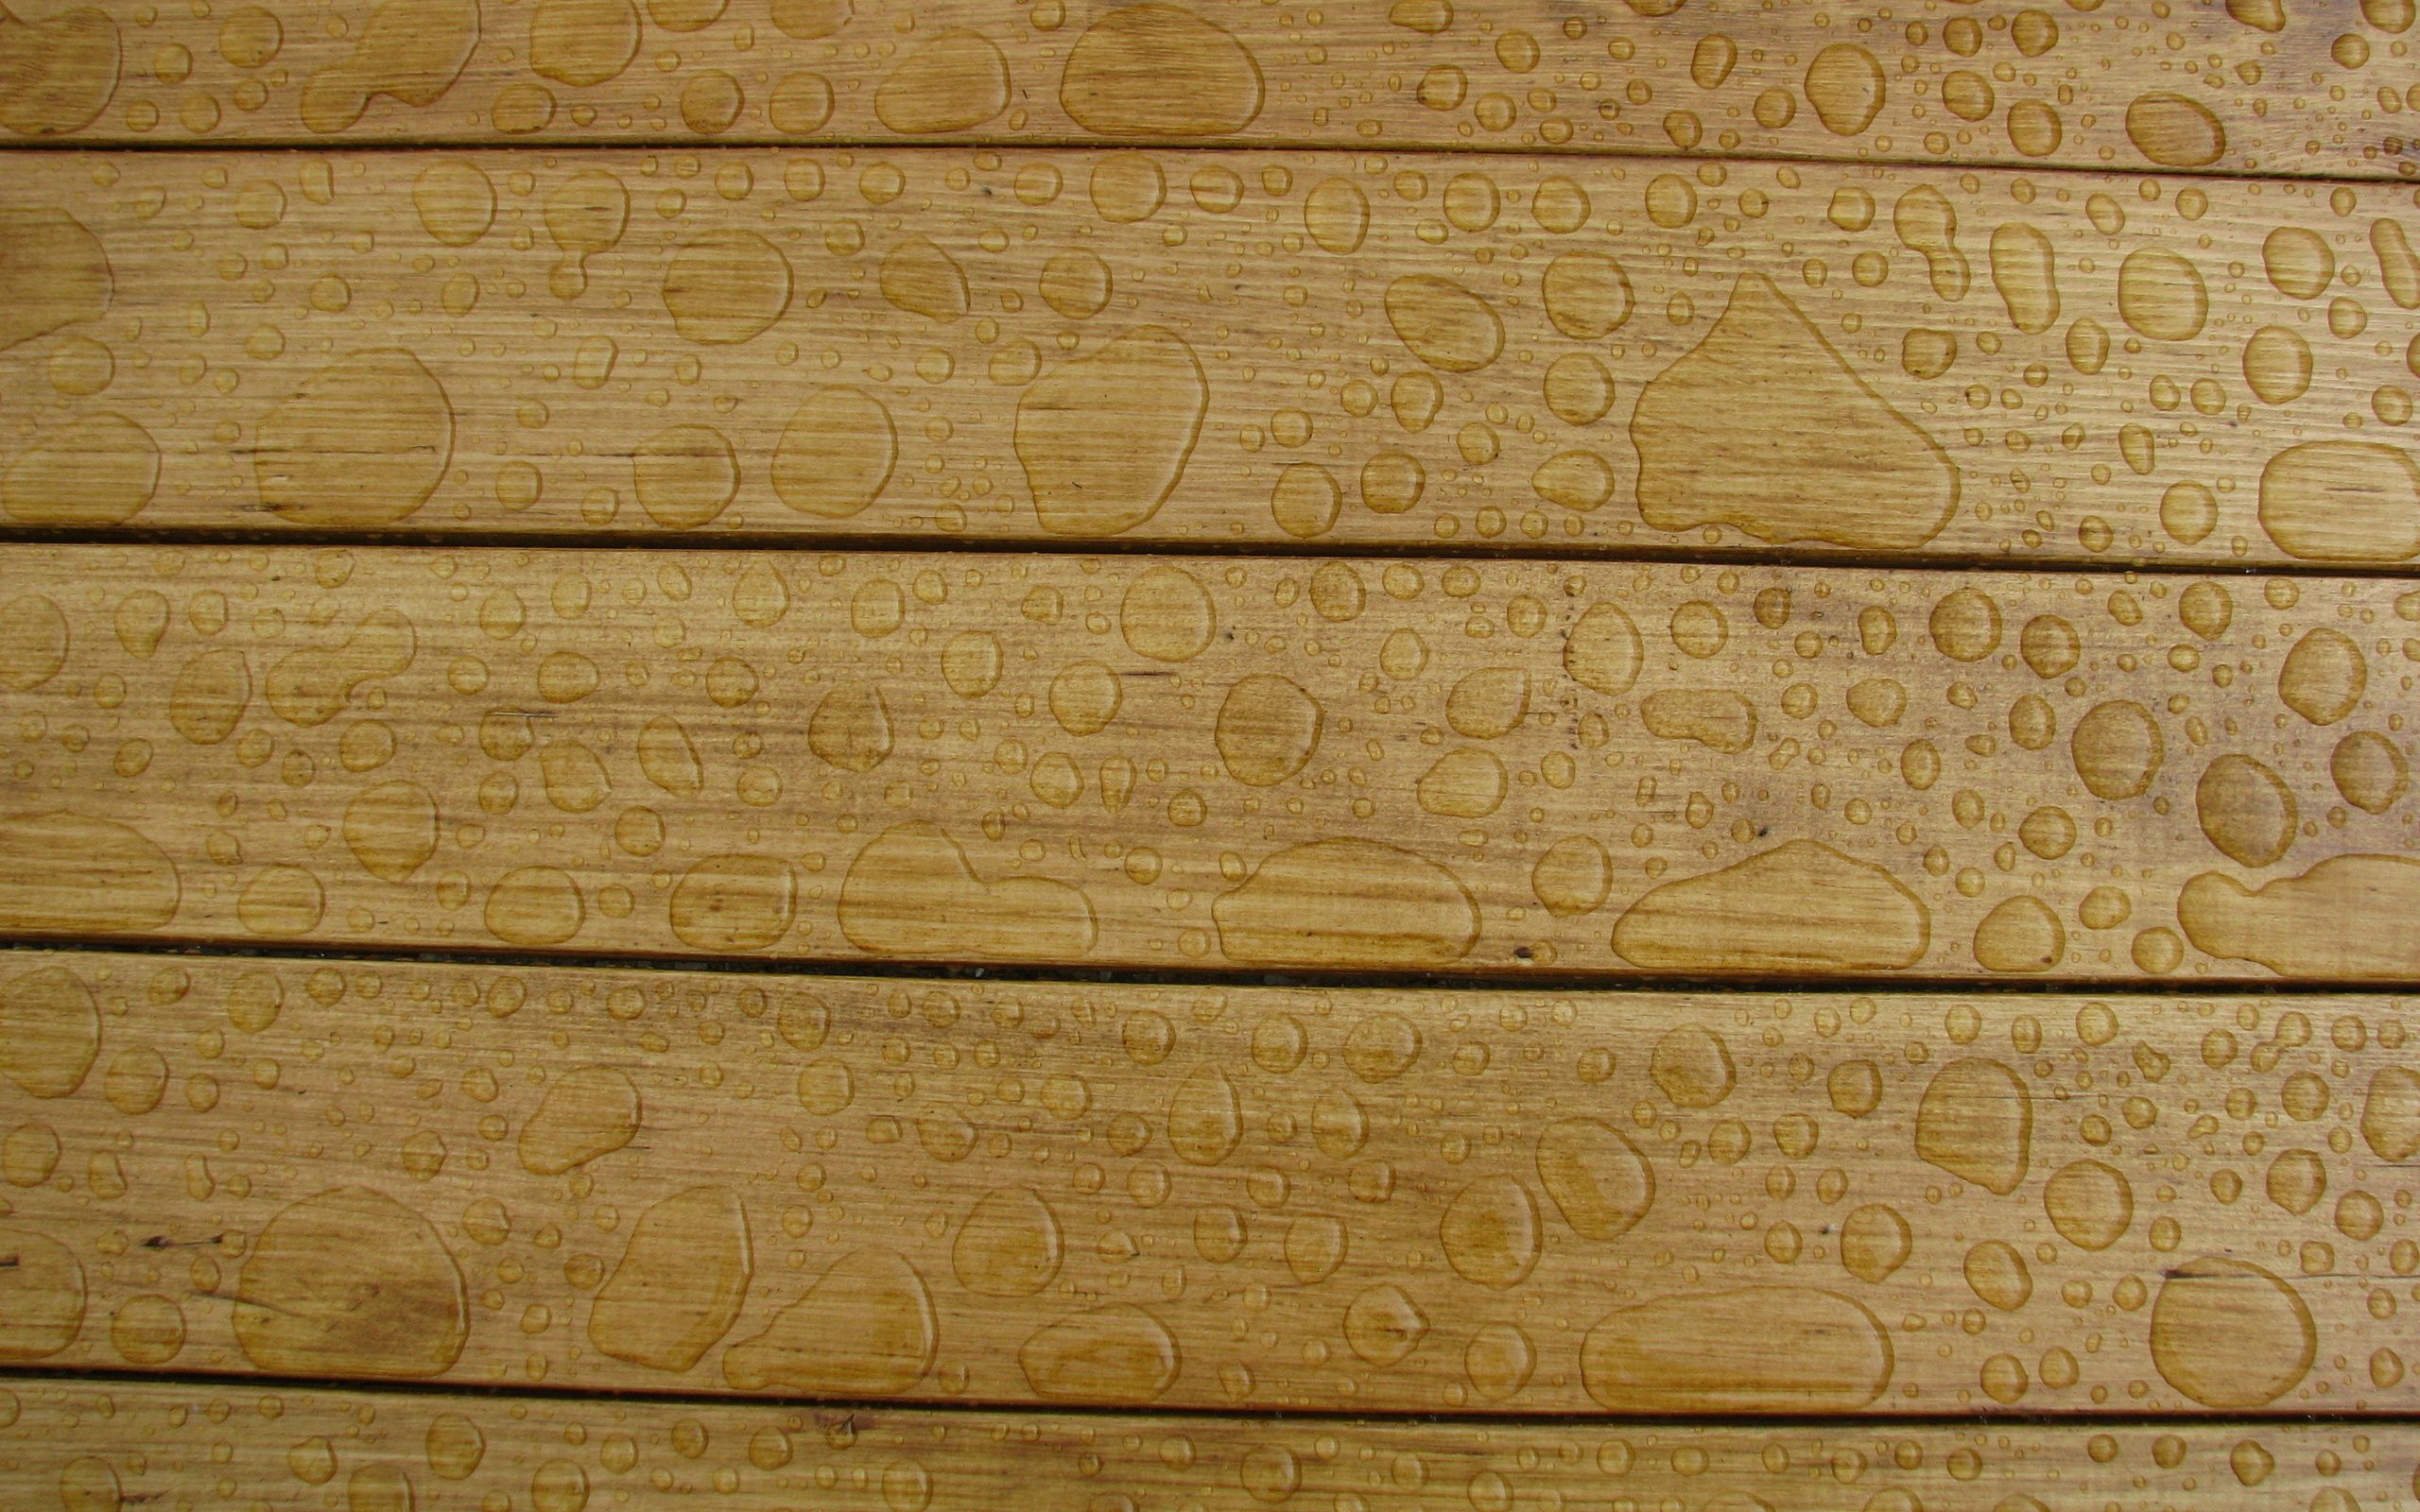 board, drops, wet, texture, textures, surface, planks, humid High Definition image